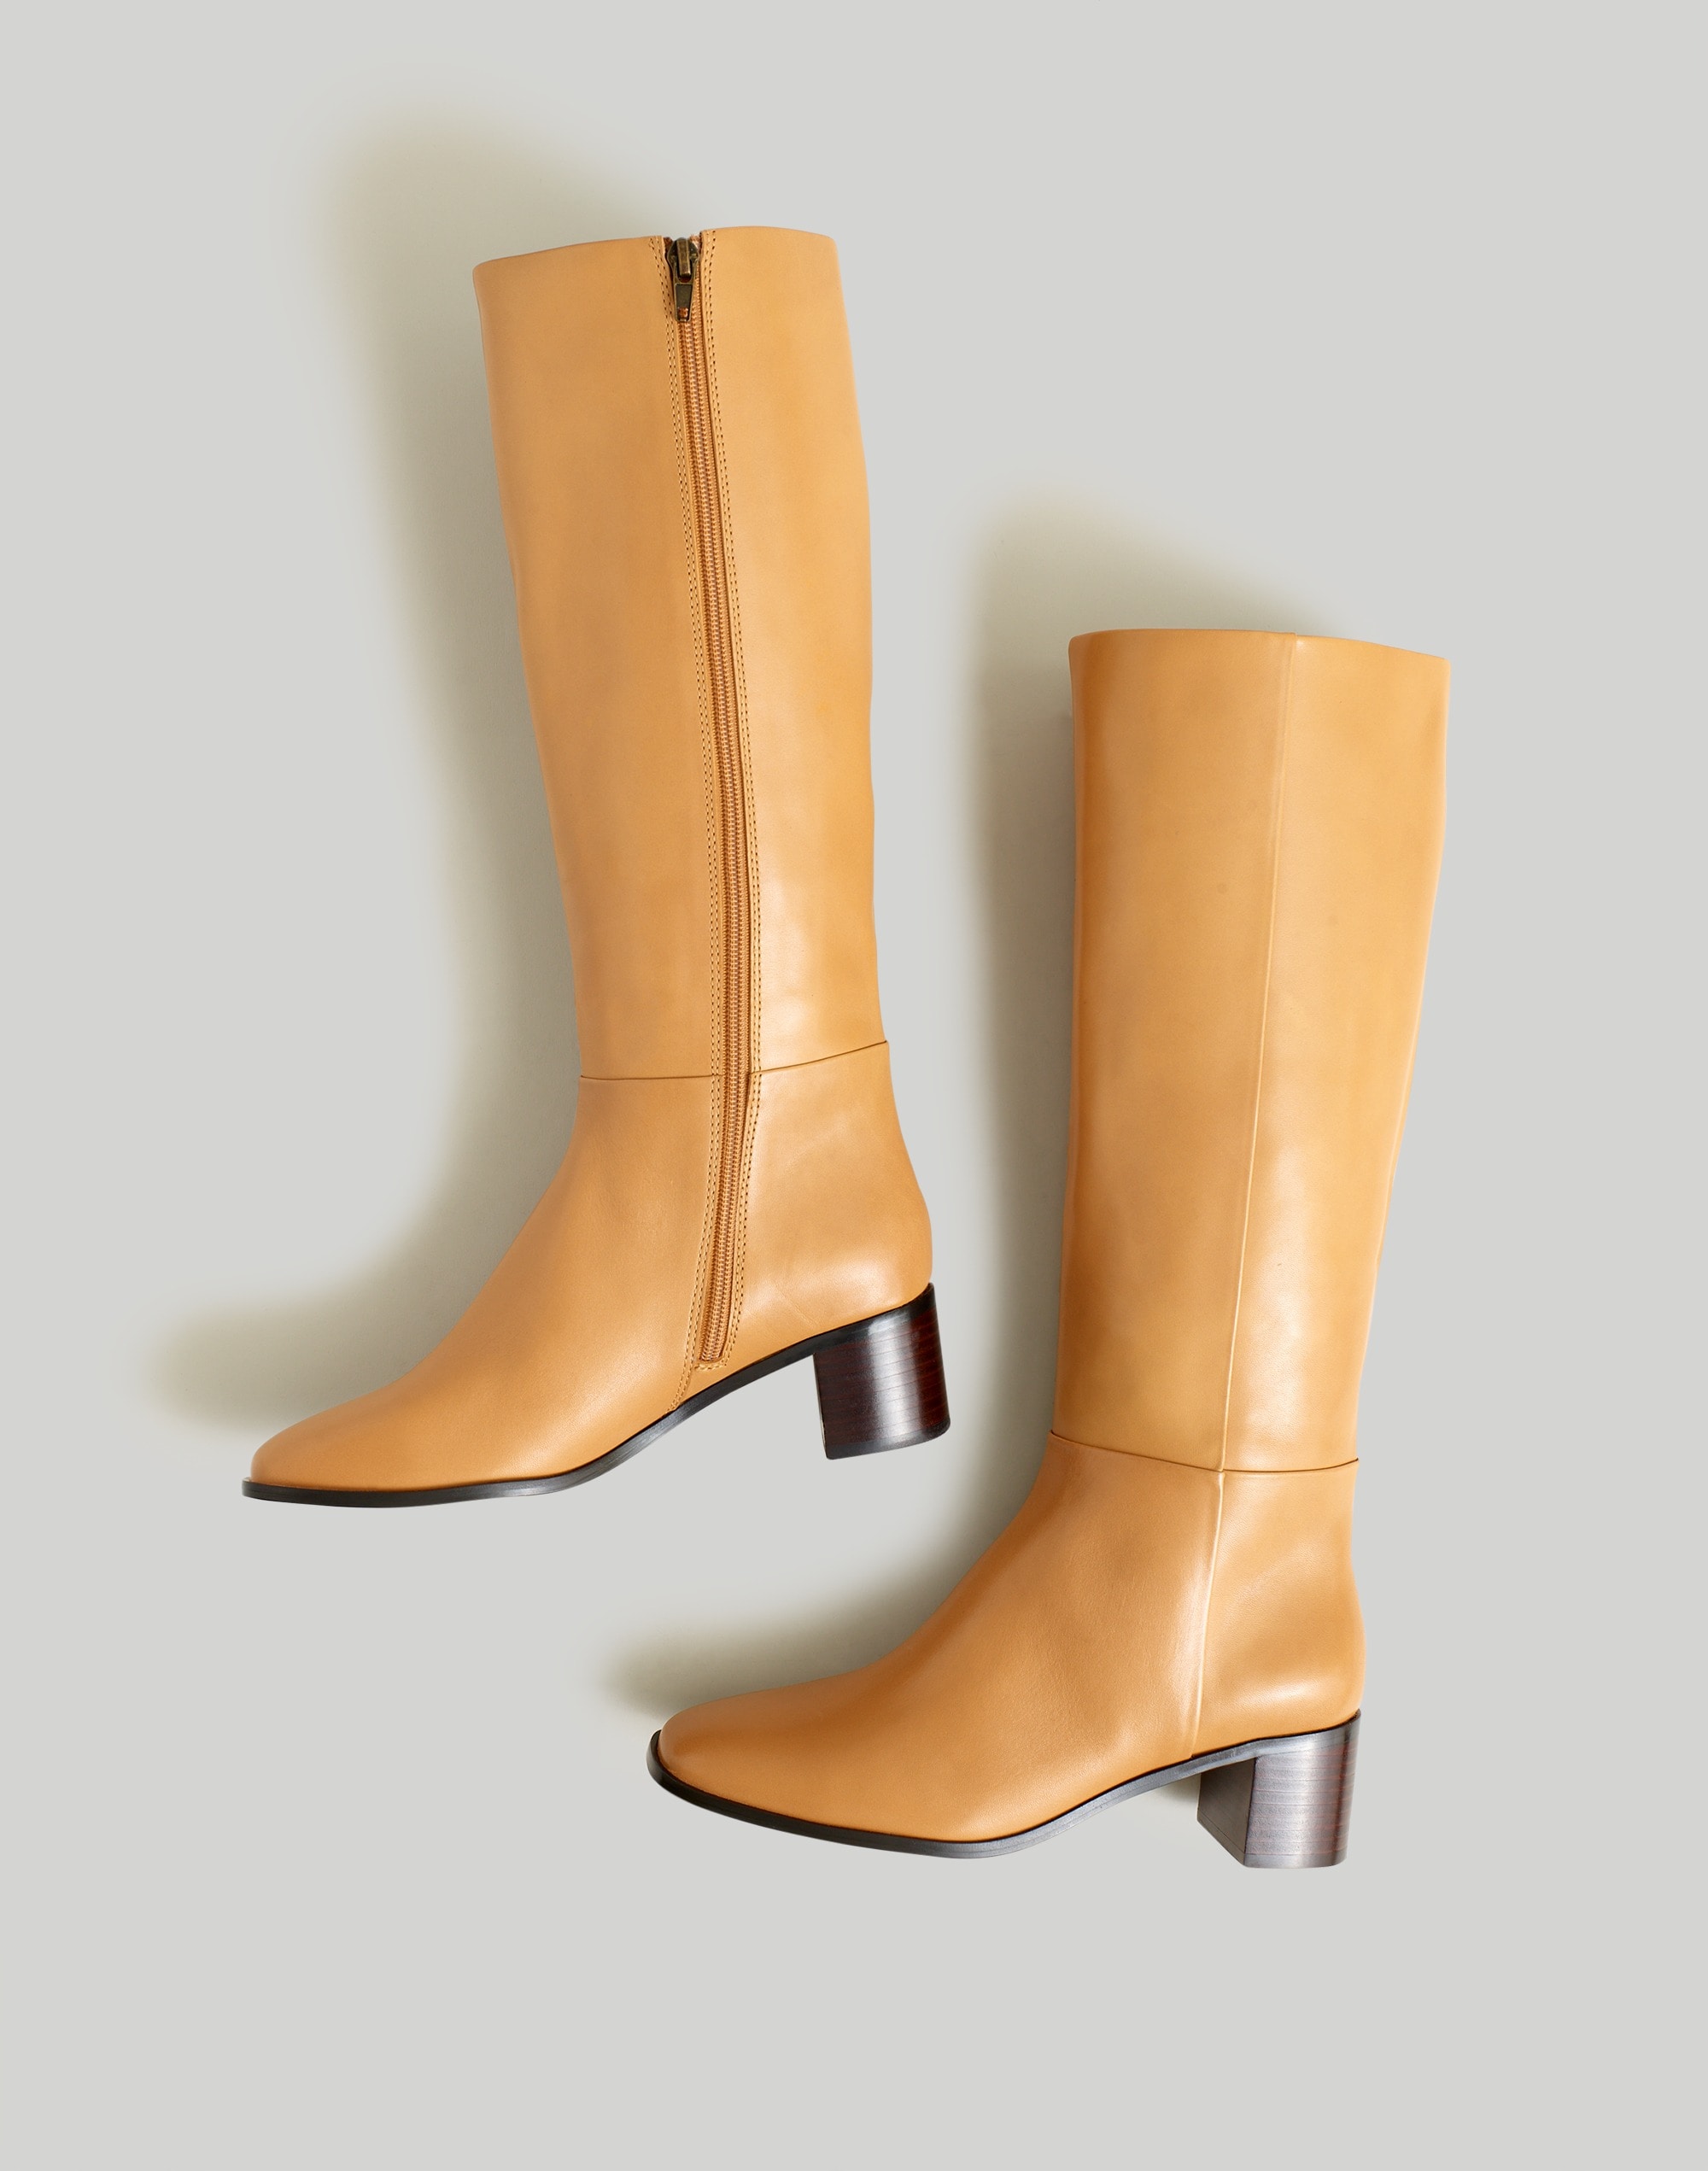 The Monterey Tall Boot